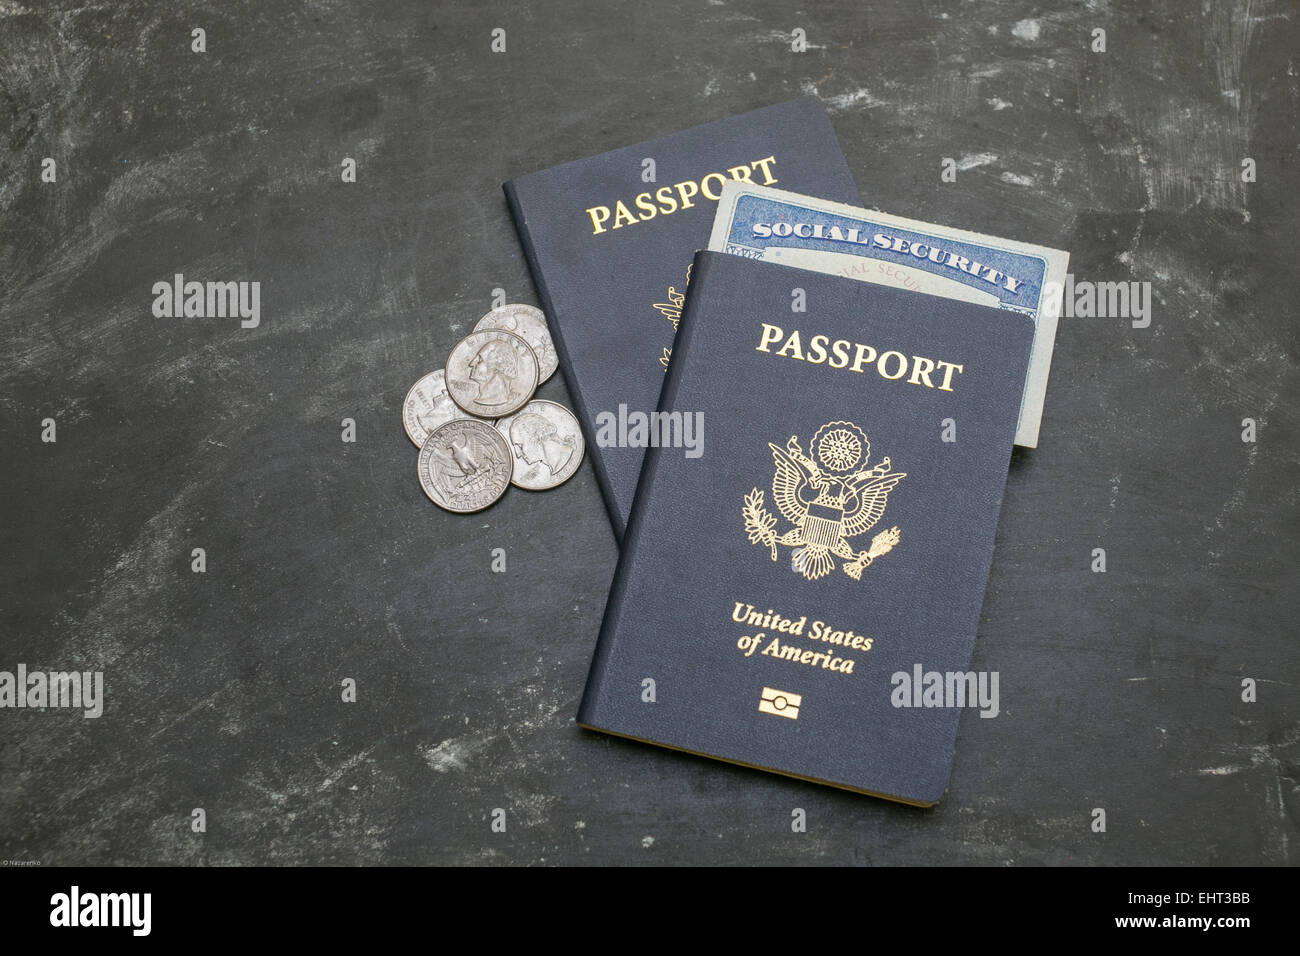 Two US passports on black background. American citizenship. Social security card in a document. Traveling around the world. Coin Stock Photo